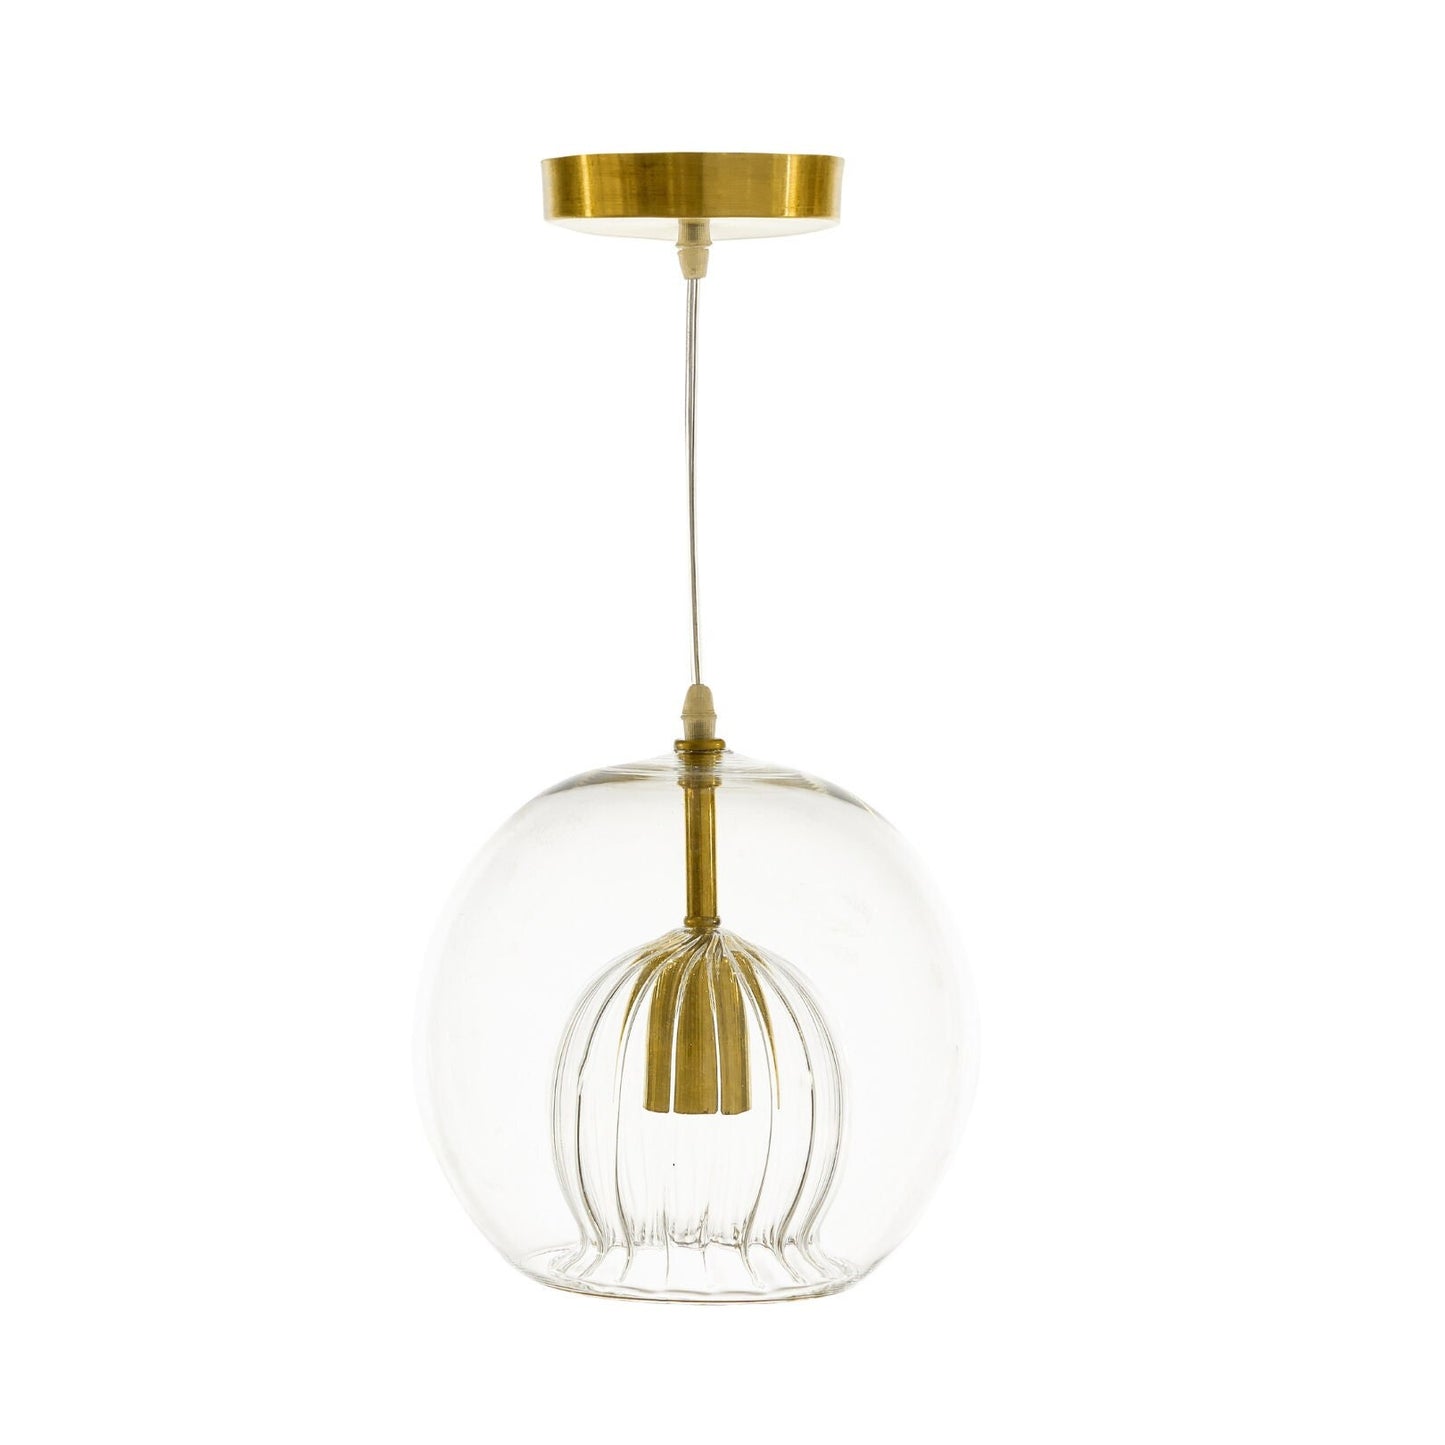 Clear light fixture for room decor